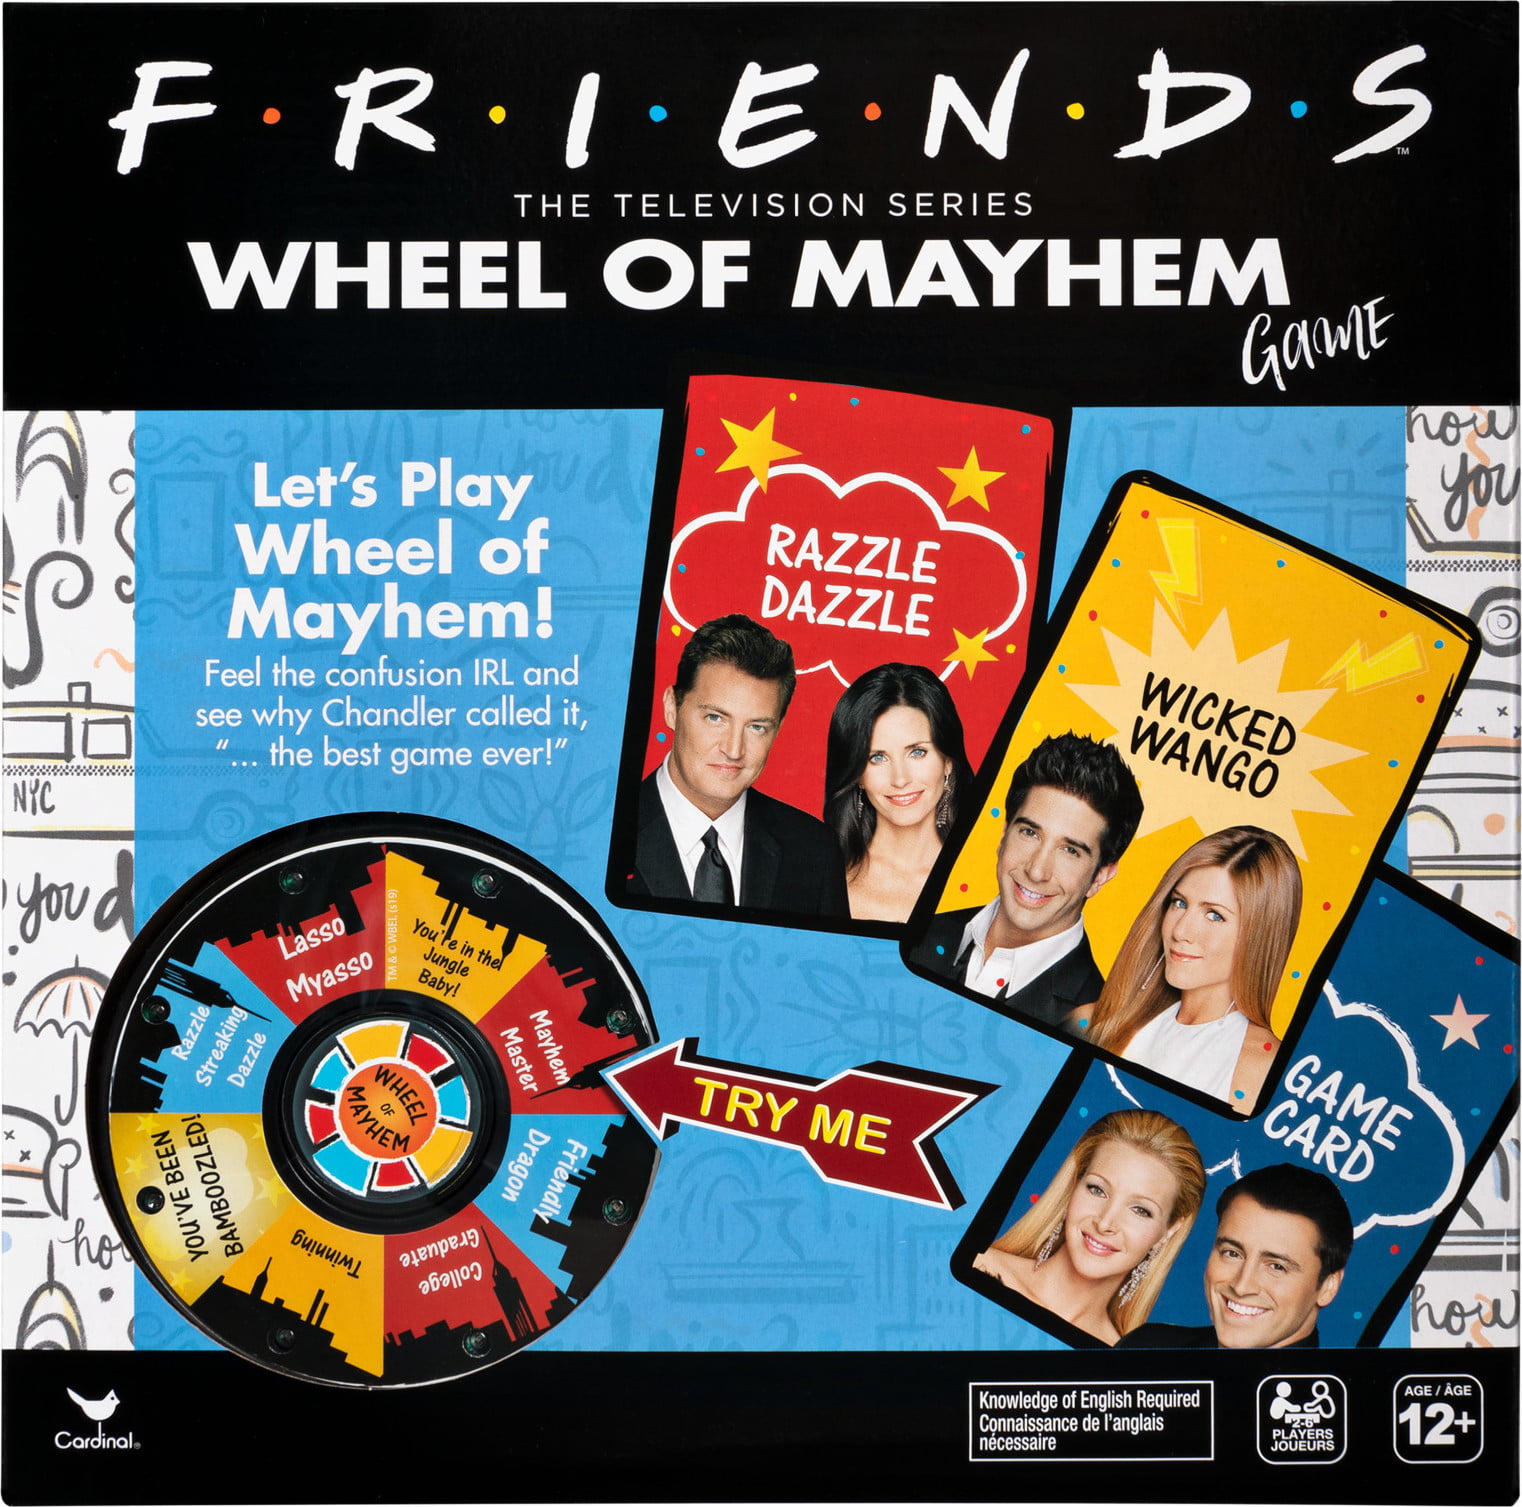 Friends The Television Series The One With The Apartment Bet Board Game New